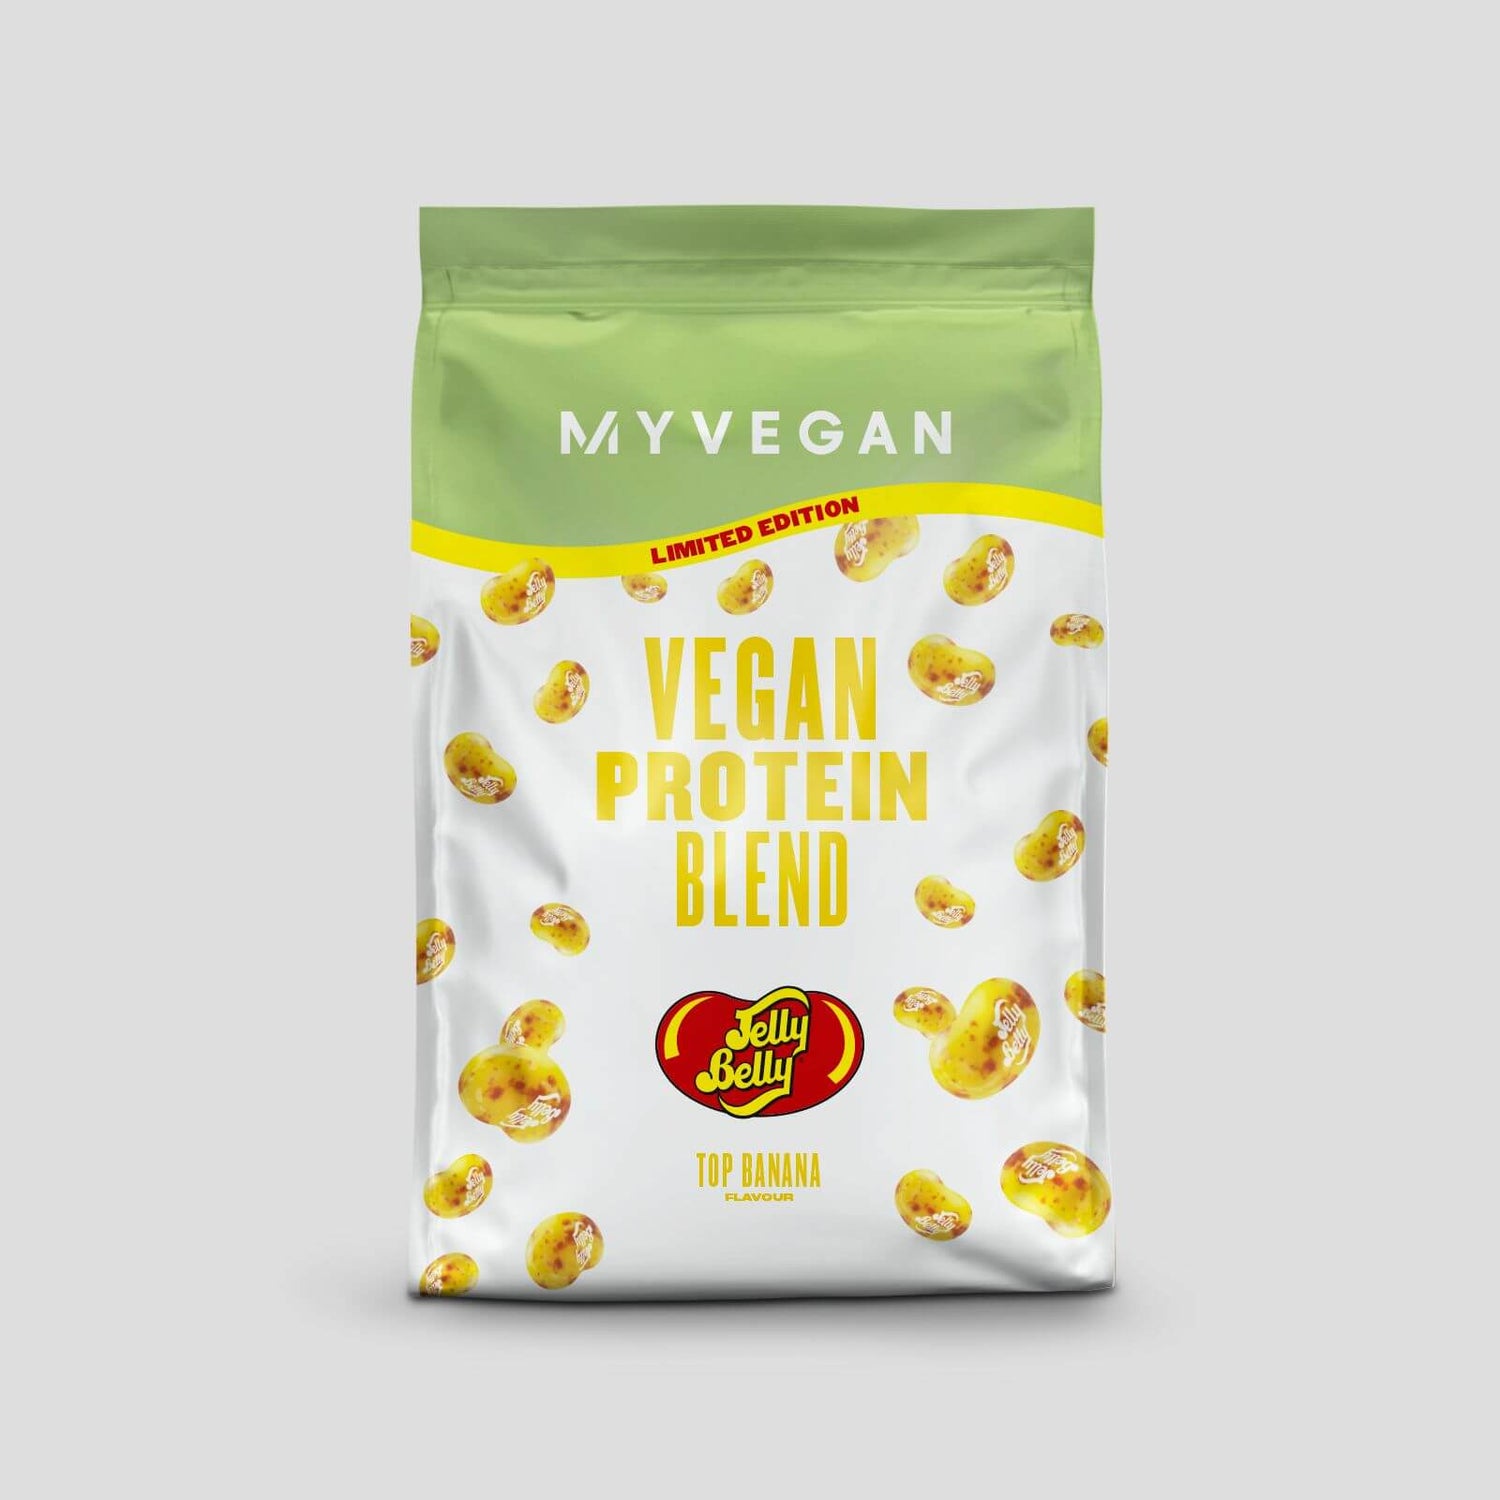 Vegan Protein Blend - Limited Edition Jelly Belly - Top Banaan